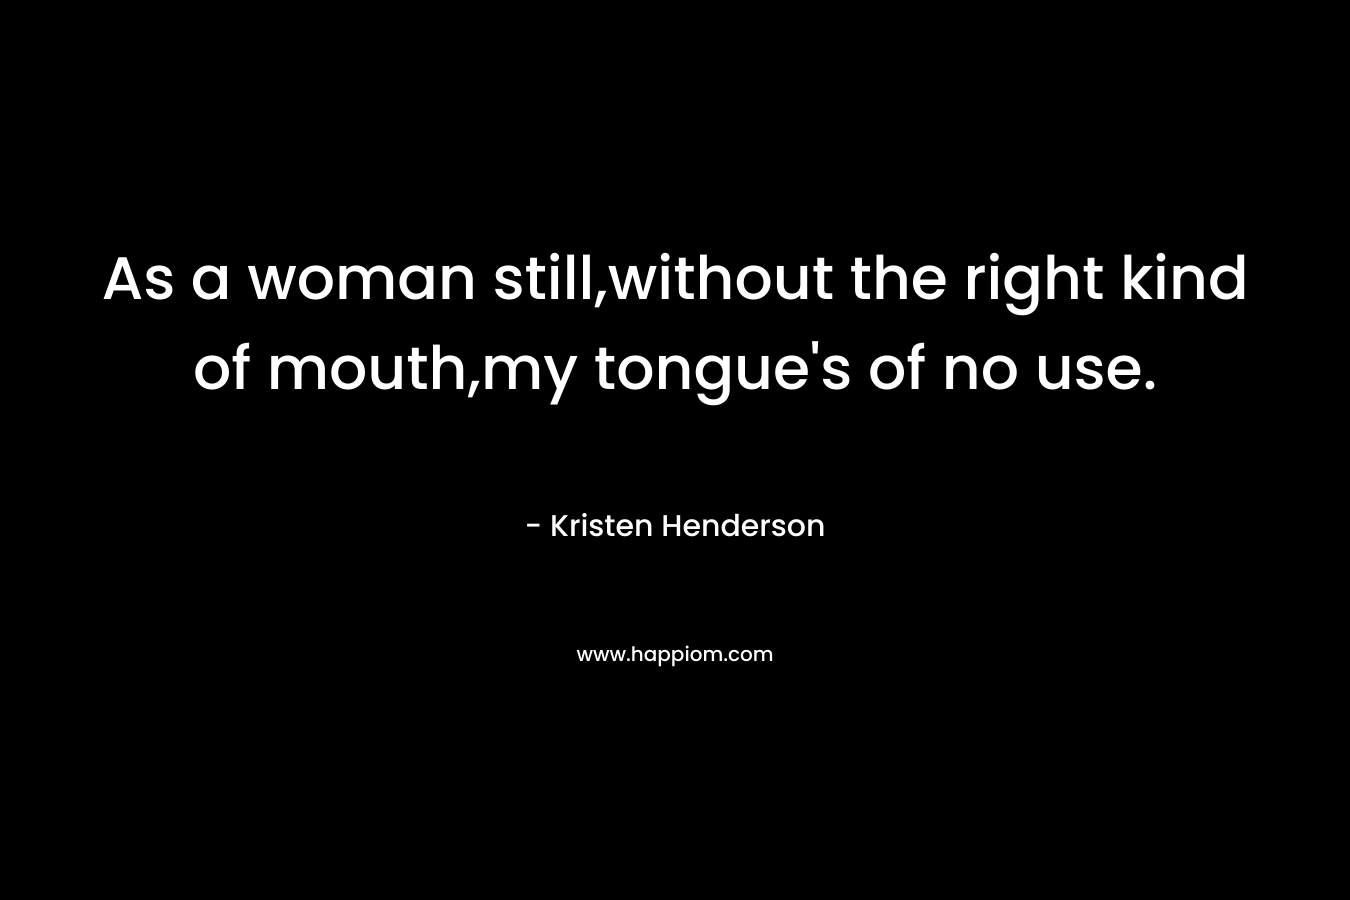 As a woman still,without the right kind of mouth,my tongue’s of no use. – Kristen Henderson